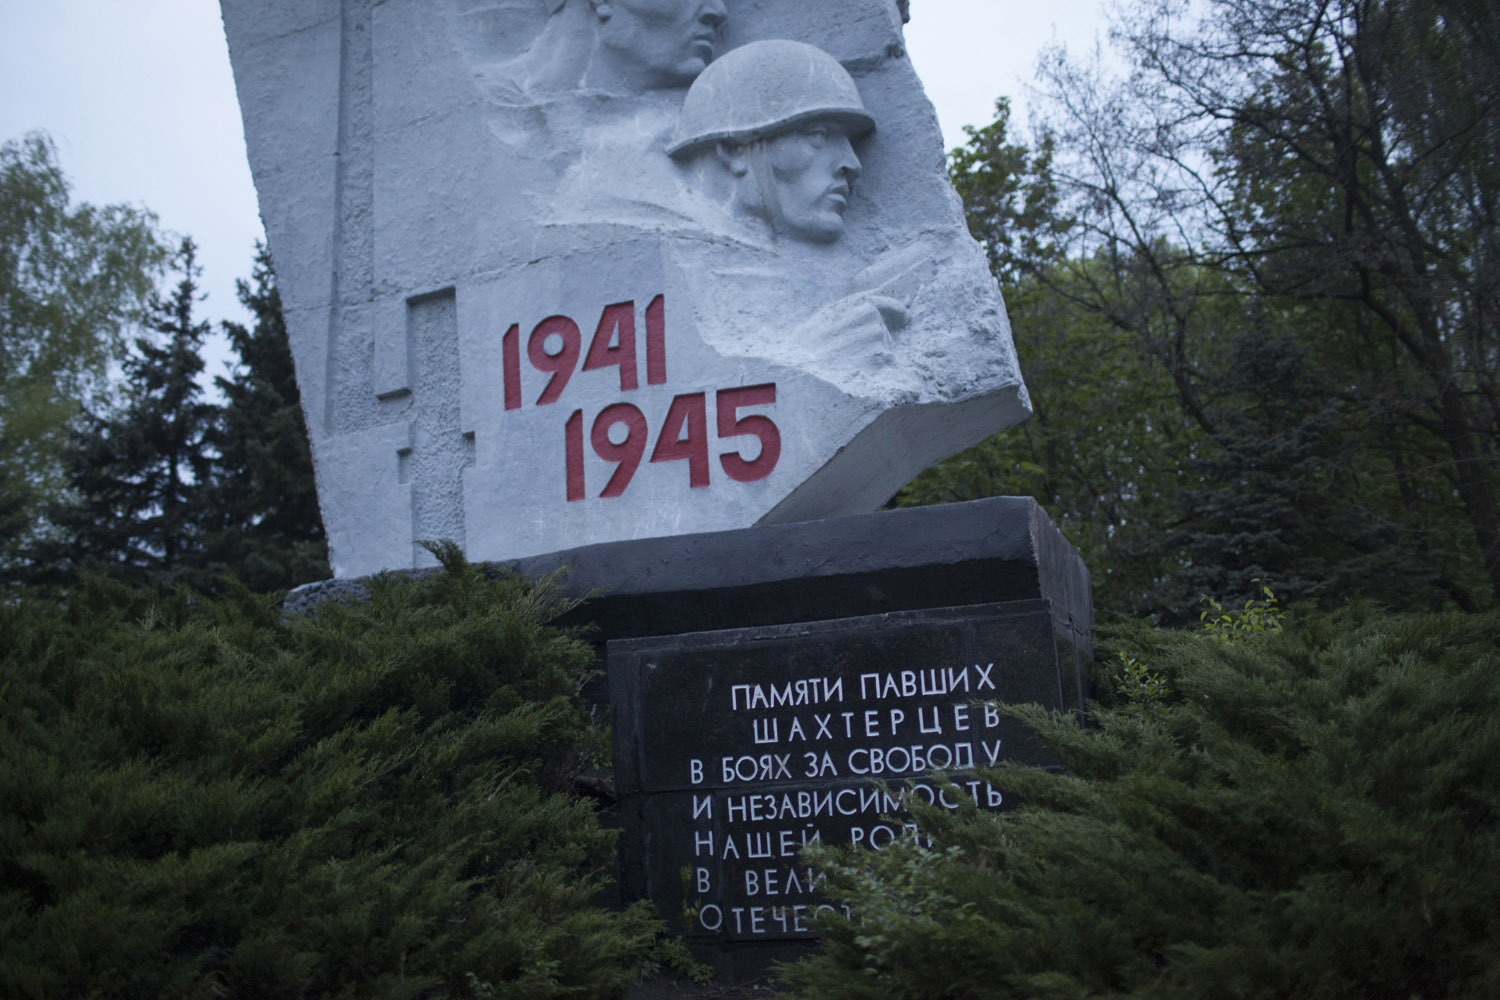 A monument in Shakhtiorsk dedicated to the miners who died fighting in the Second World War, that in Russia is known as the Great Patriotic War. The victory over Nazi Germany, and the enormous sacrifices that accompanied it, are still a central element in the identity of the people of the Donbass.